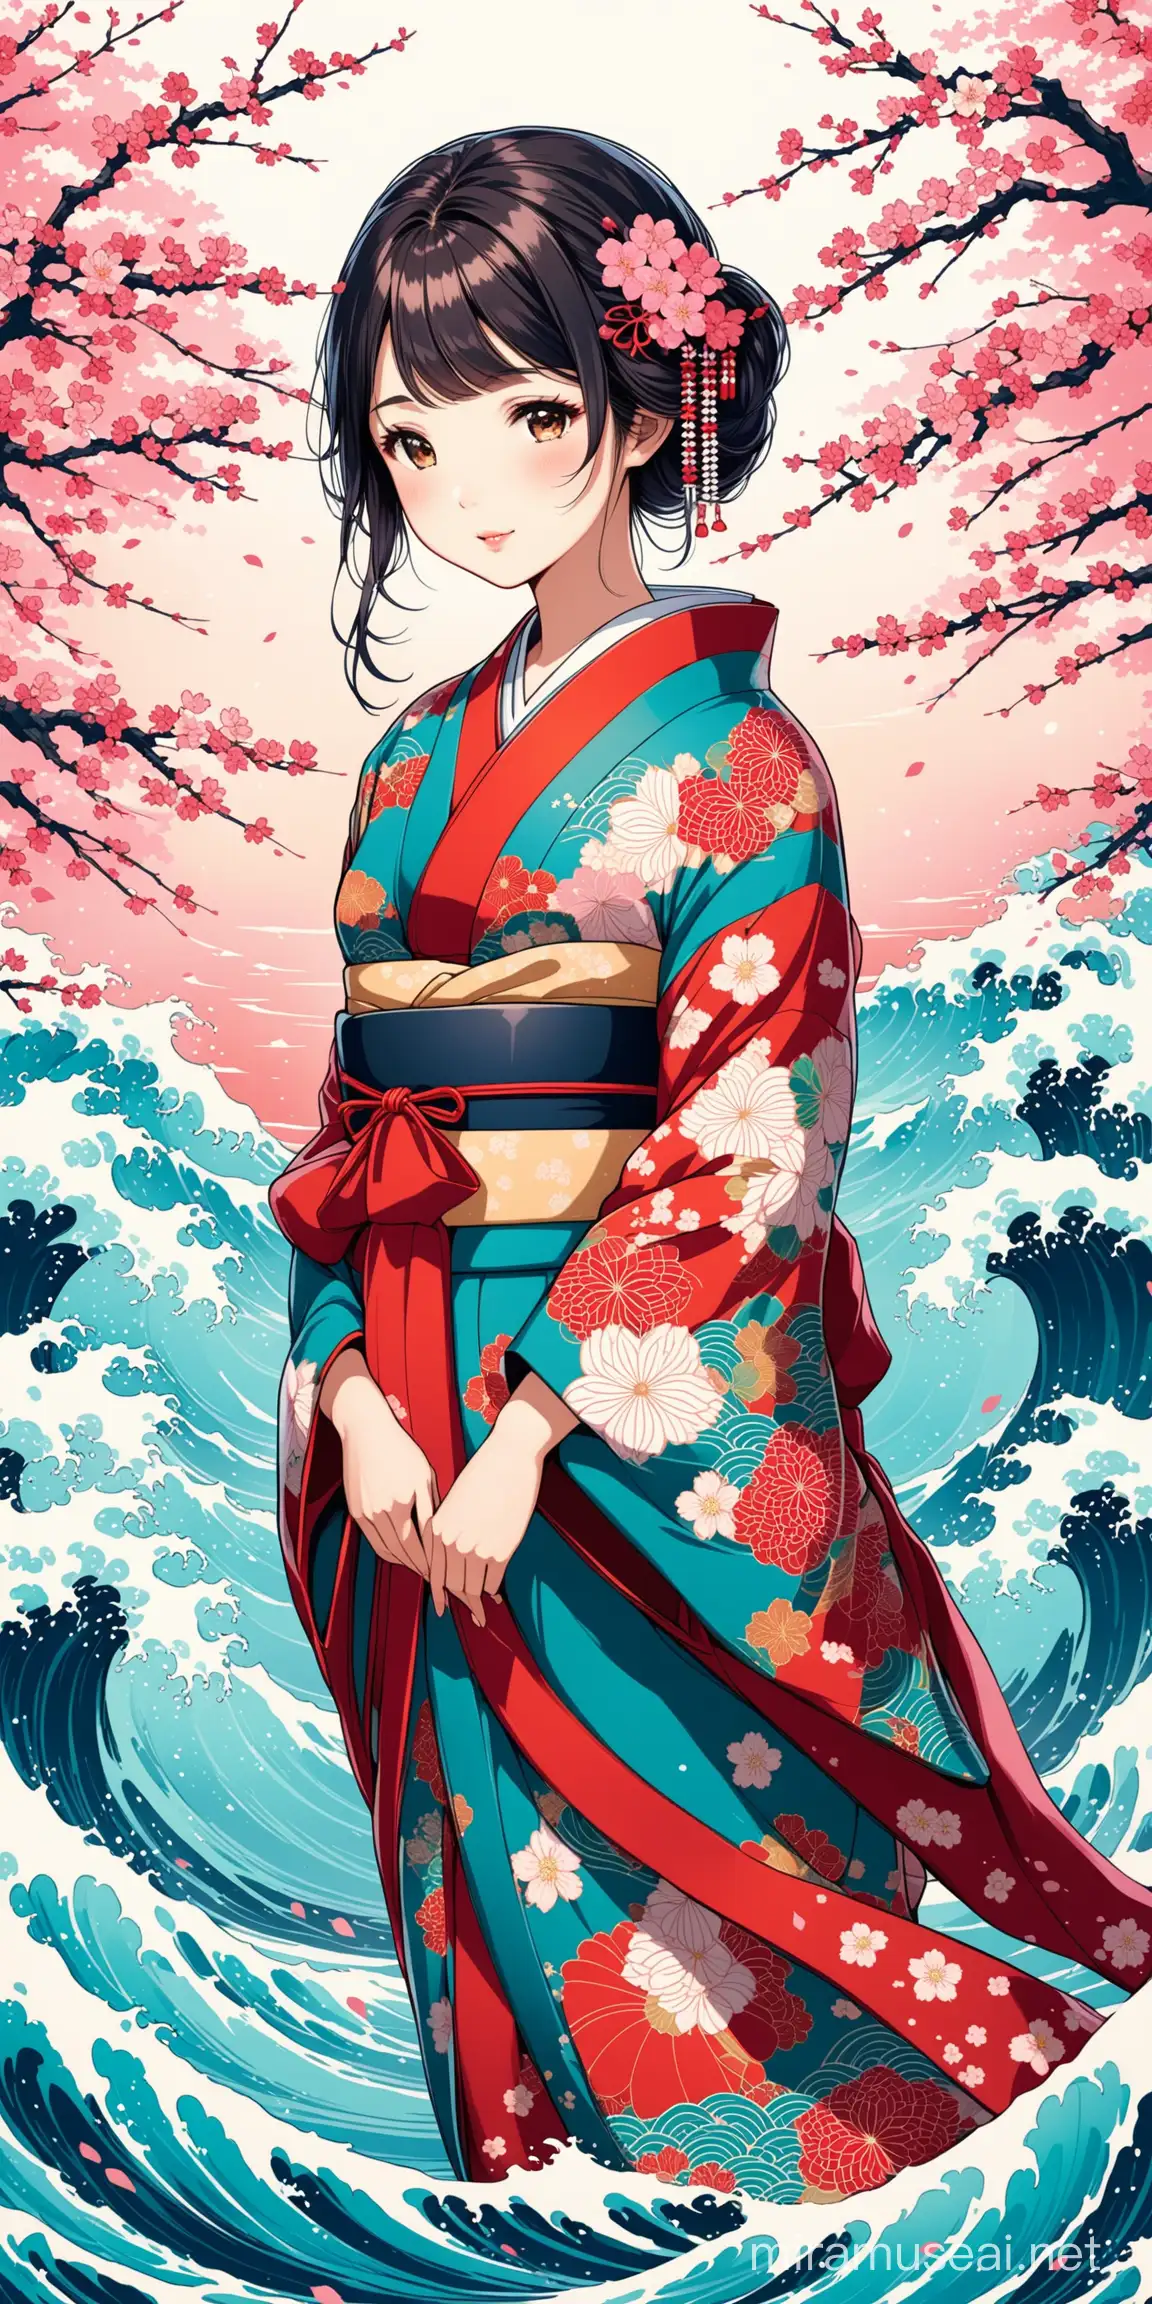 The image depicts an Asian girl wearing a traditional kimono, adorned with classic Japanese patterns such as cherry blossoms or waves. The kimono should have vibrant colors and intricate designs reminiscent of Japanese art.